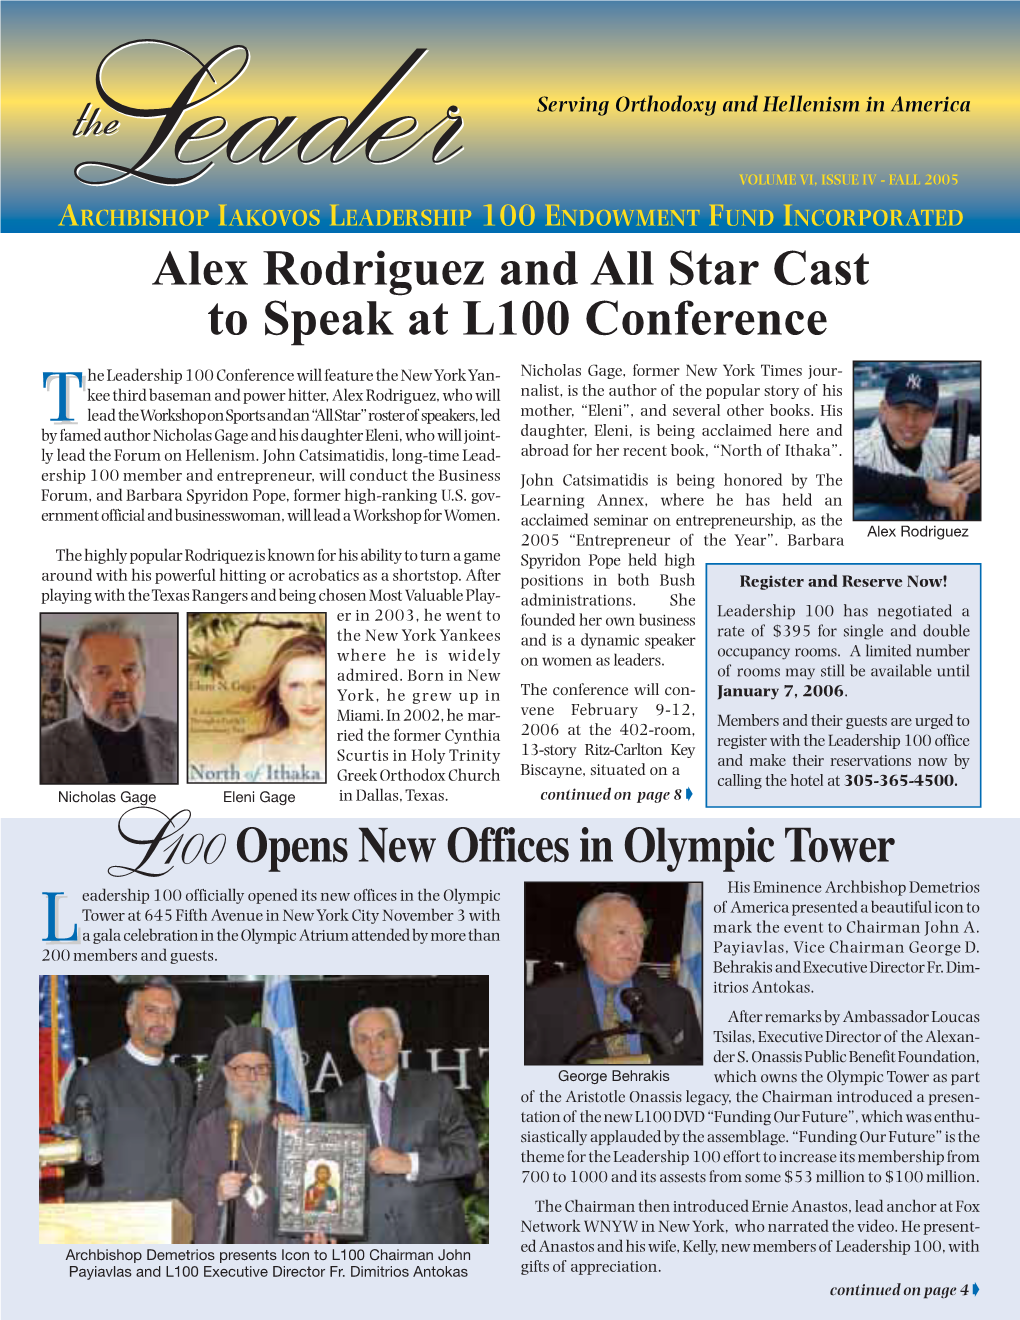 VOLUME VI, ISSUE IV - FALL 2005 ARCHBISHOP IAKOVOS LEADERSHIP 100 ENDOWMENT FUND INCORPORATED Alex Rodriguez and All Star Cast to Speak at L100 Conference